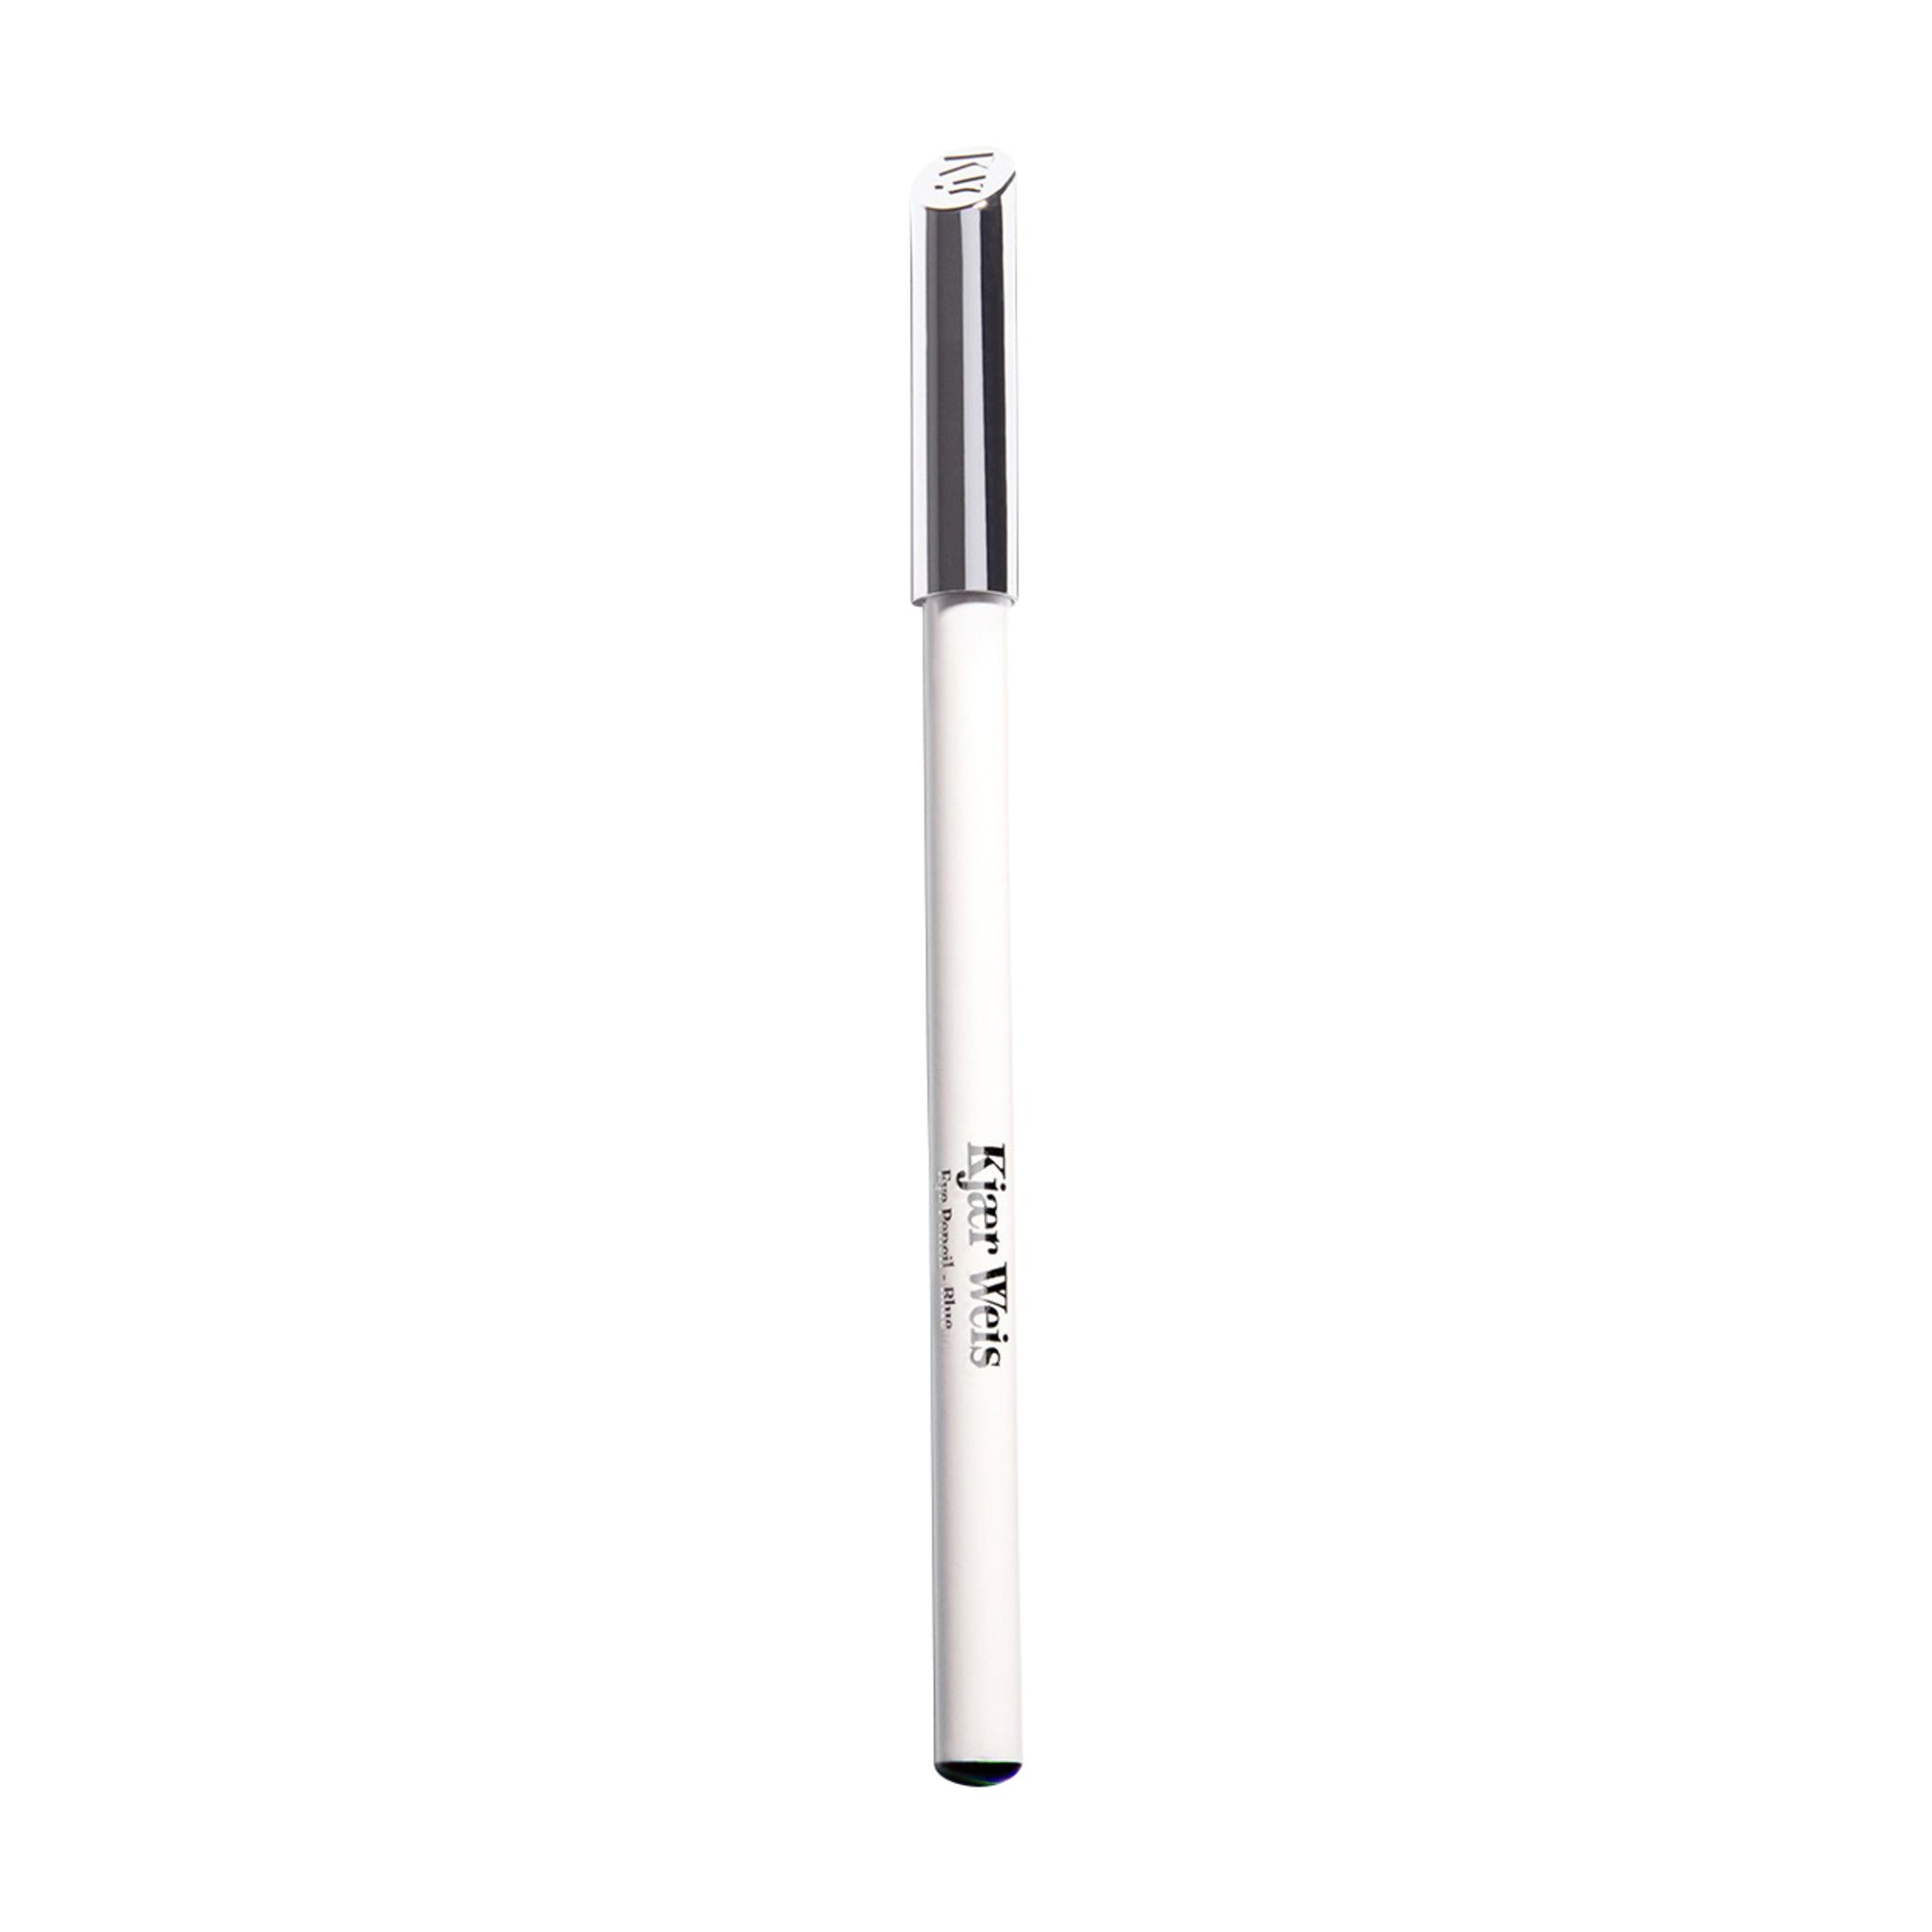 Kjaer Weis Eye Pencil Color/Shade variant: Blue main image. This product is in the color blue